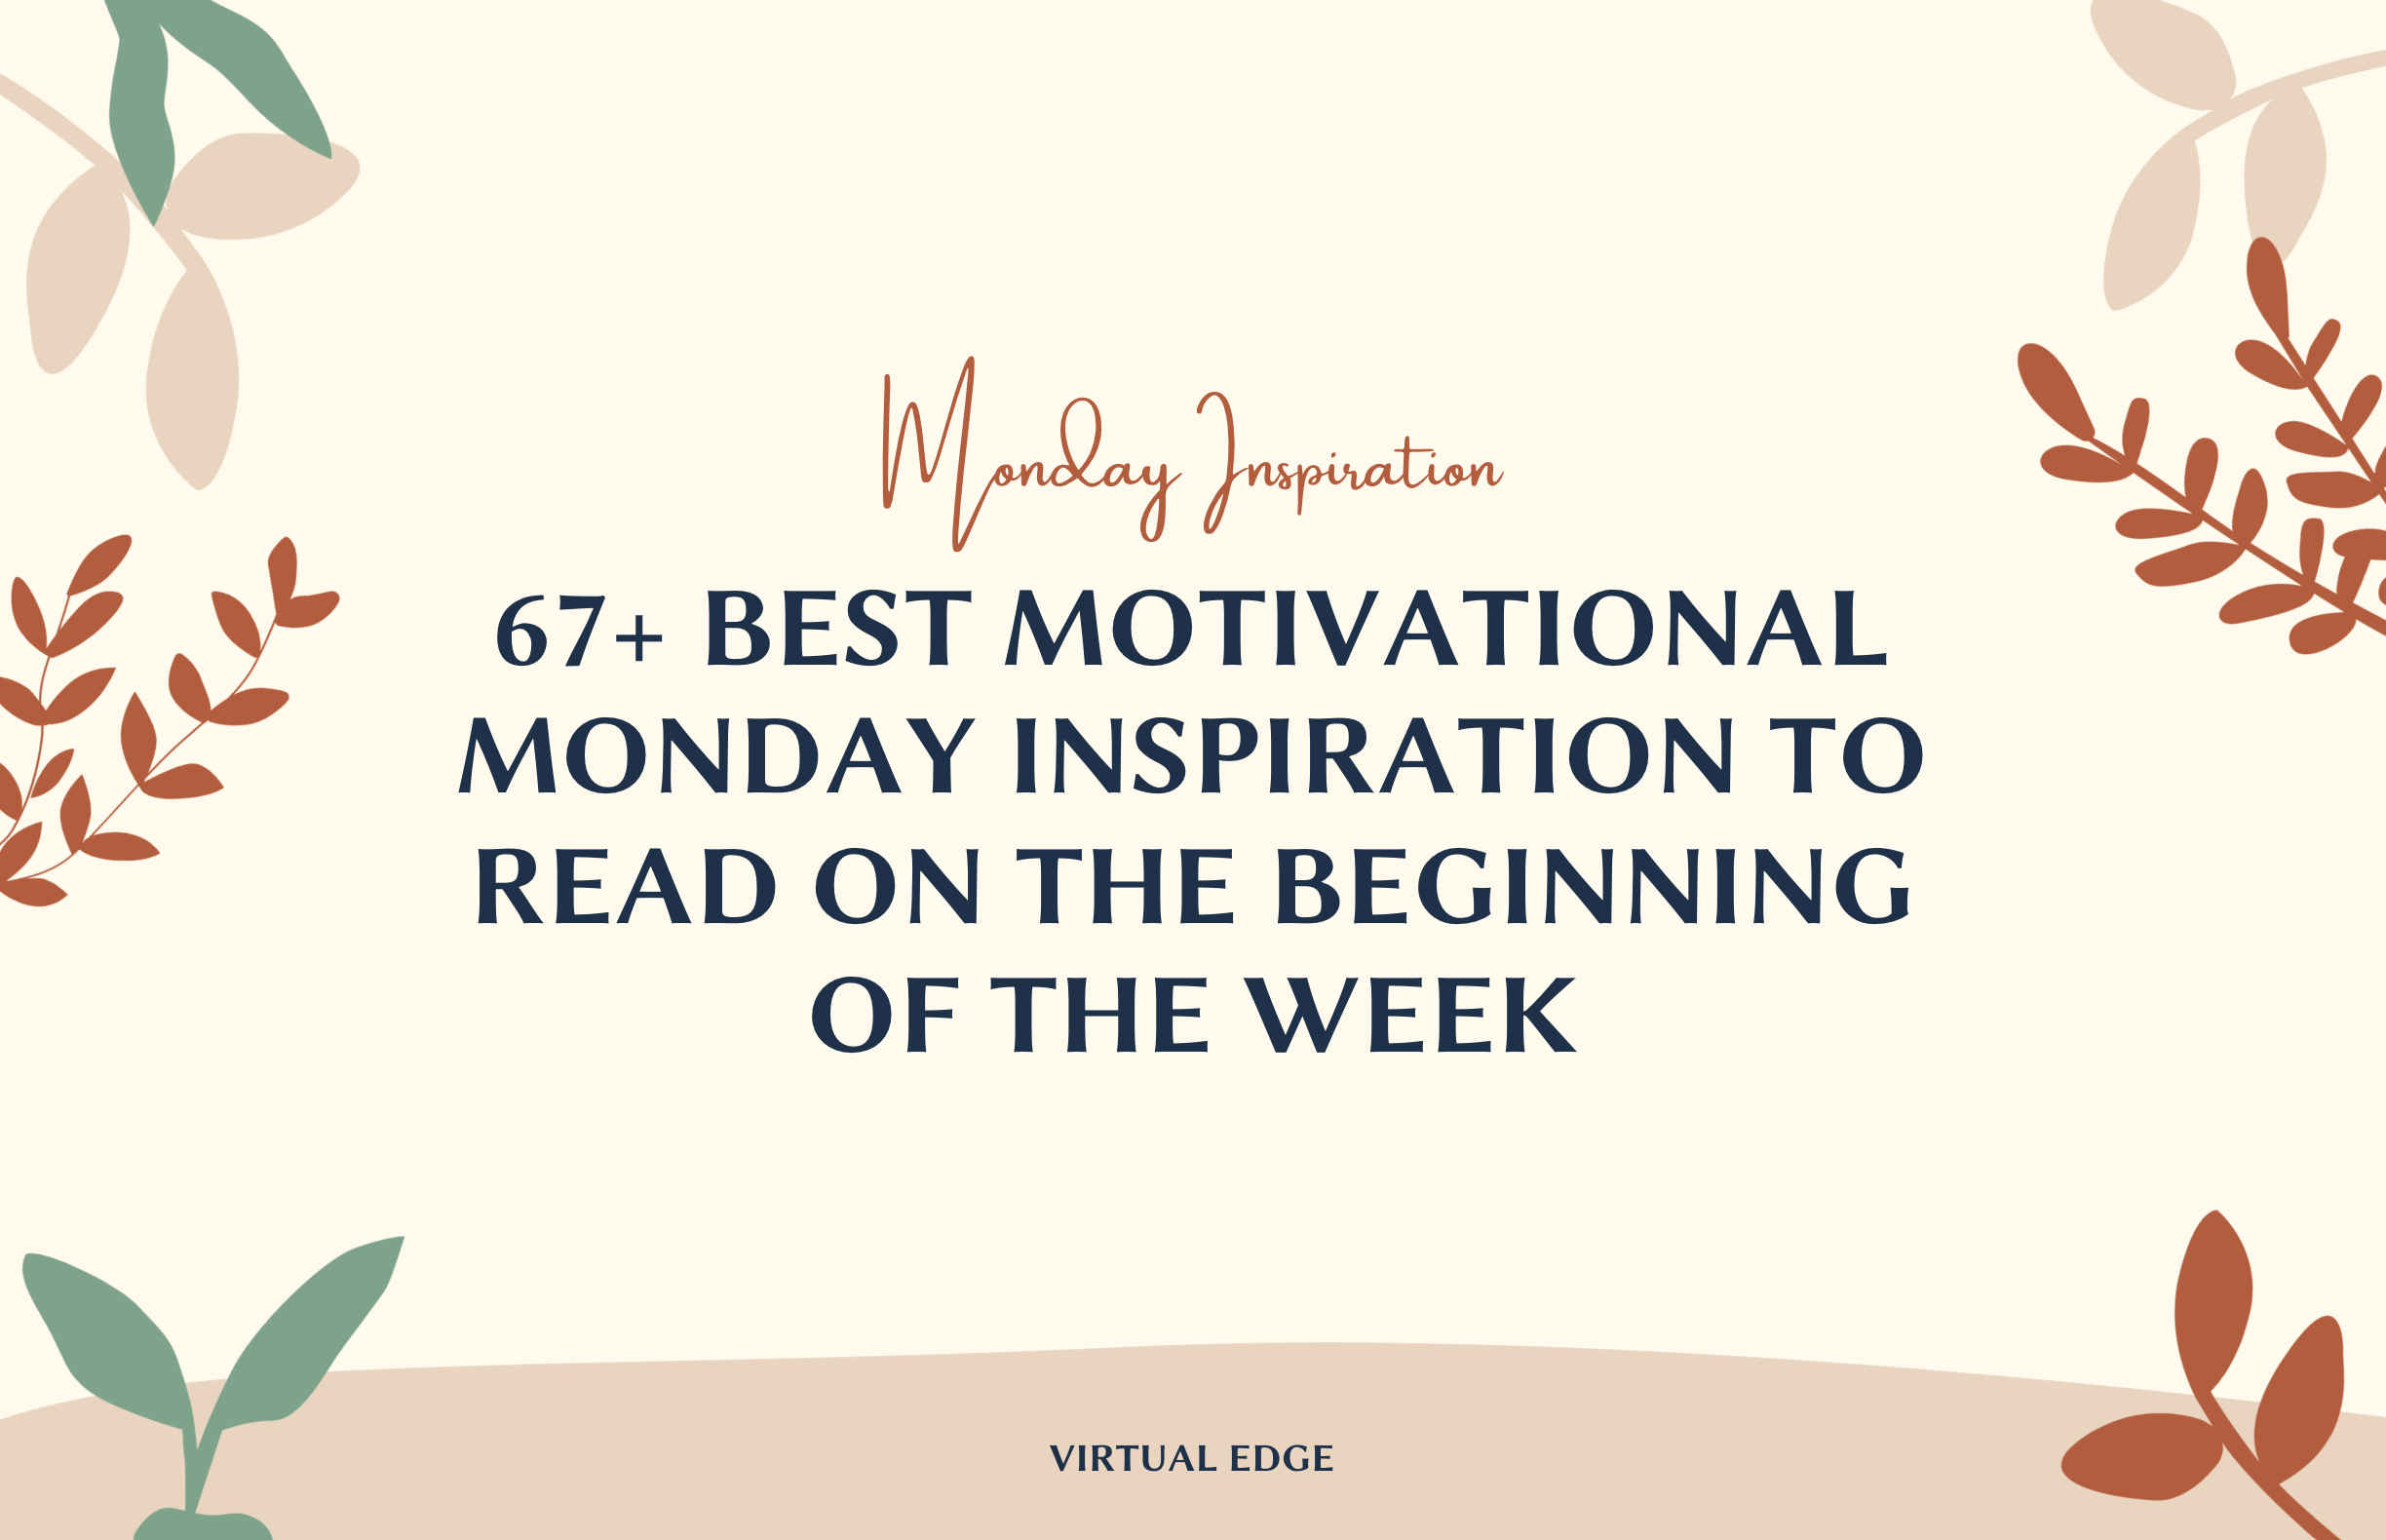 67+ Best Motivational Monday Inspiration to Read on the Beginning of the Week